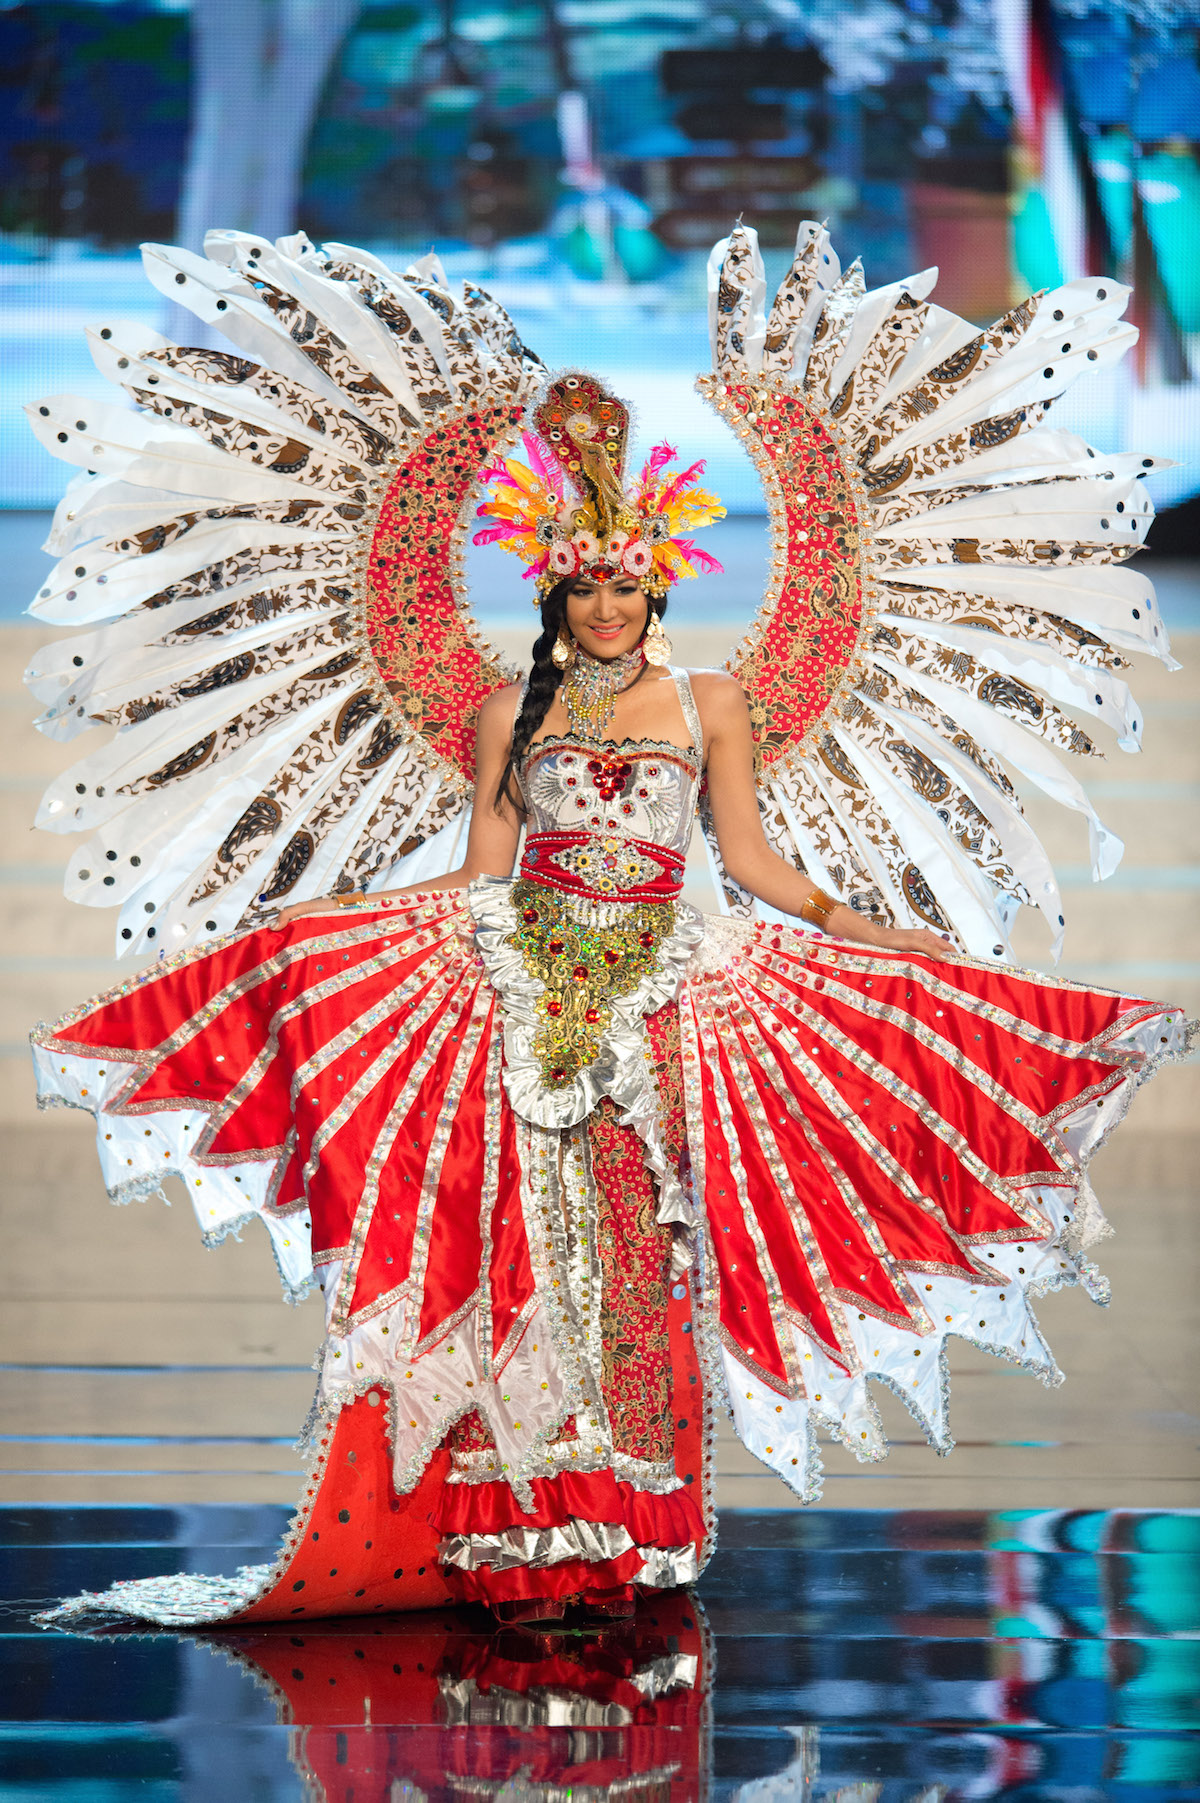 All The Times Indonesia Put Other Countries To Shame With Its Miss Universe Costumes